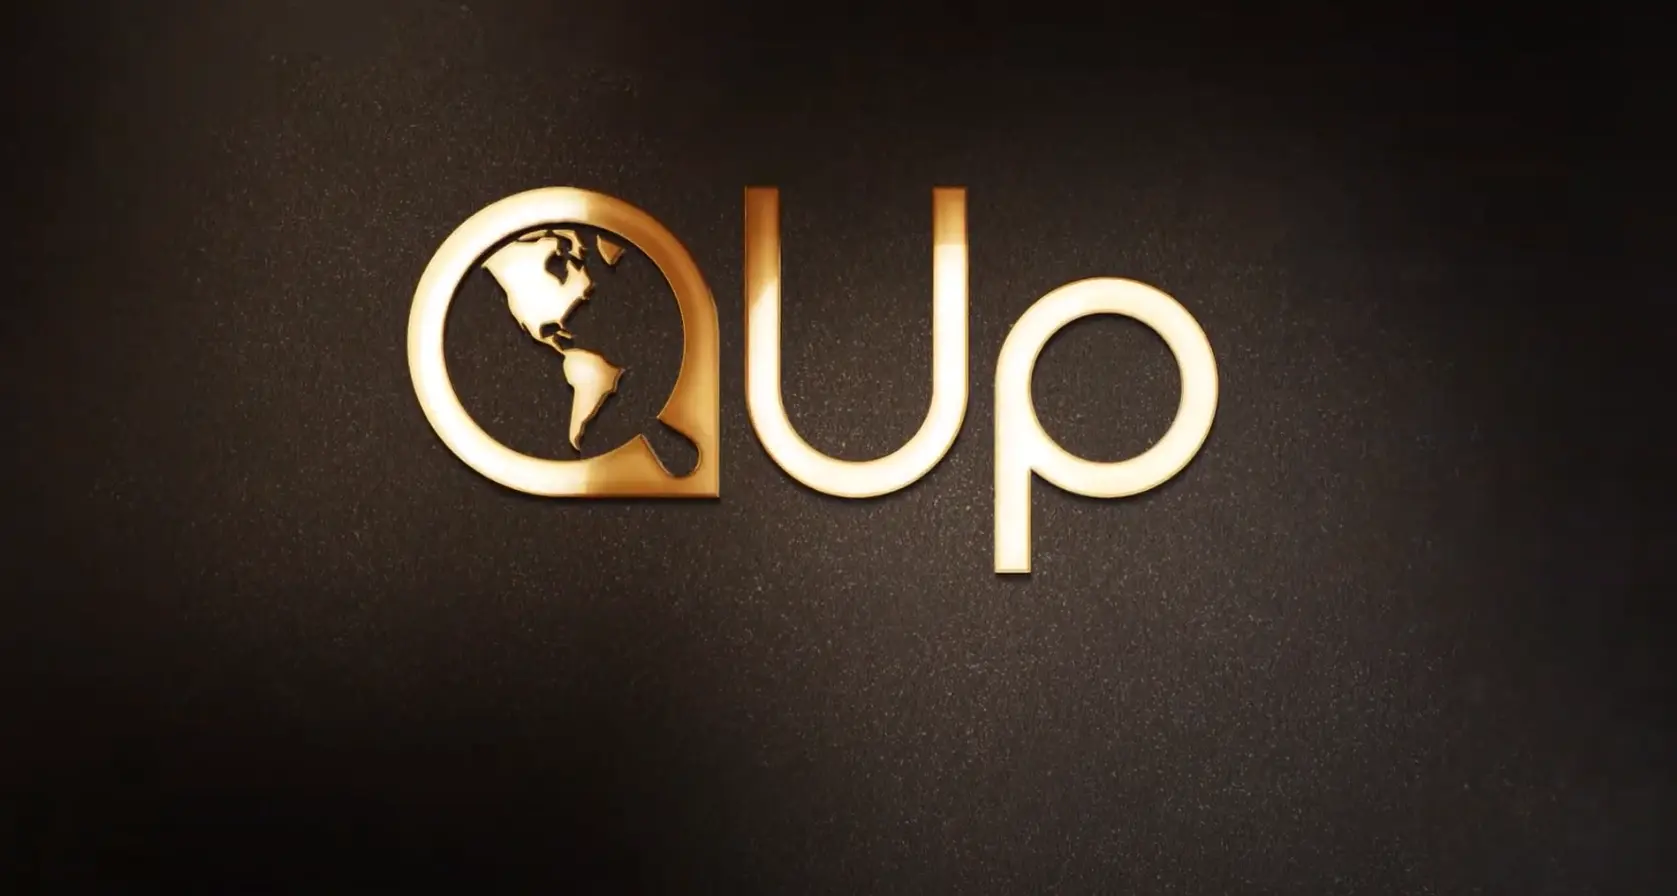 showing a qup logo in gold